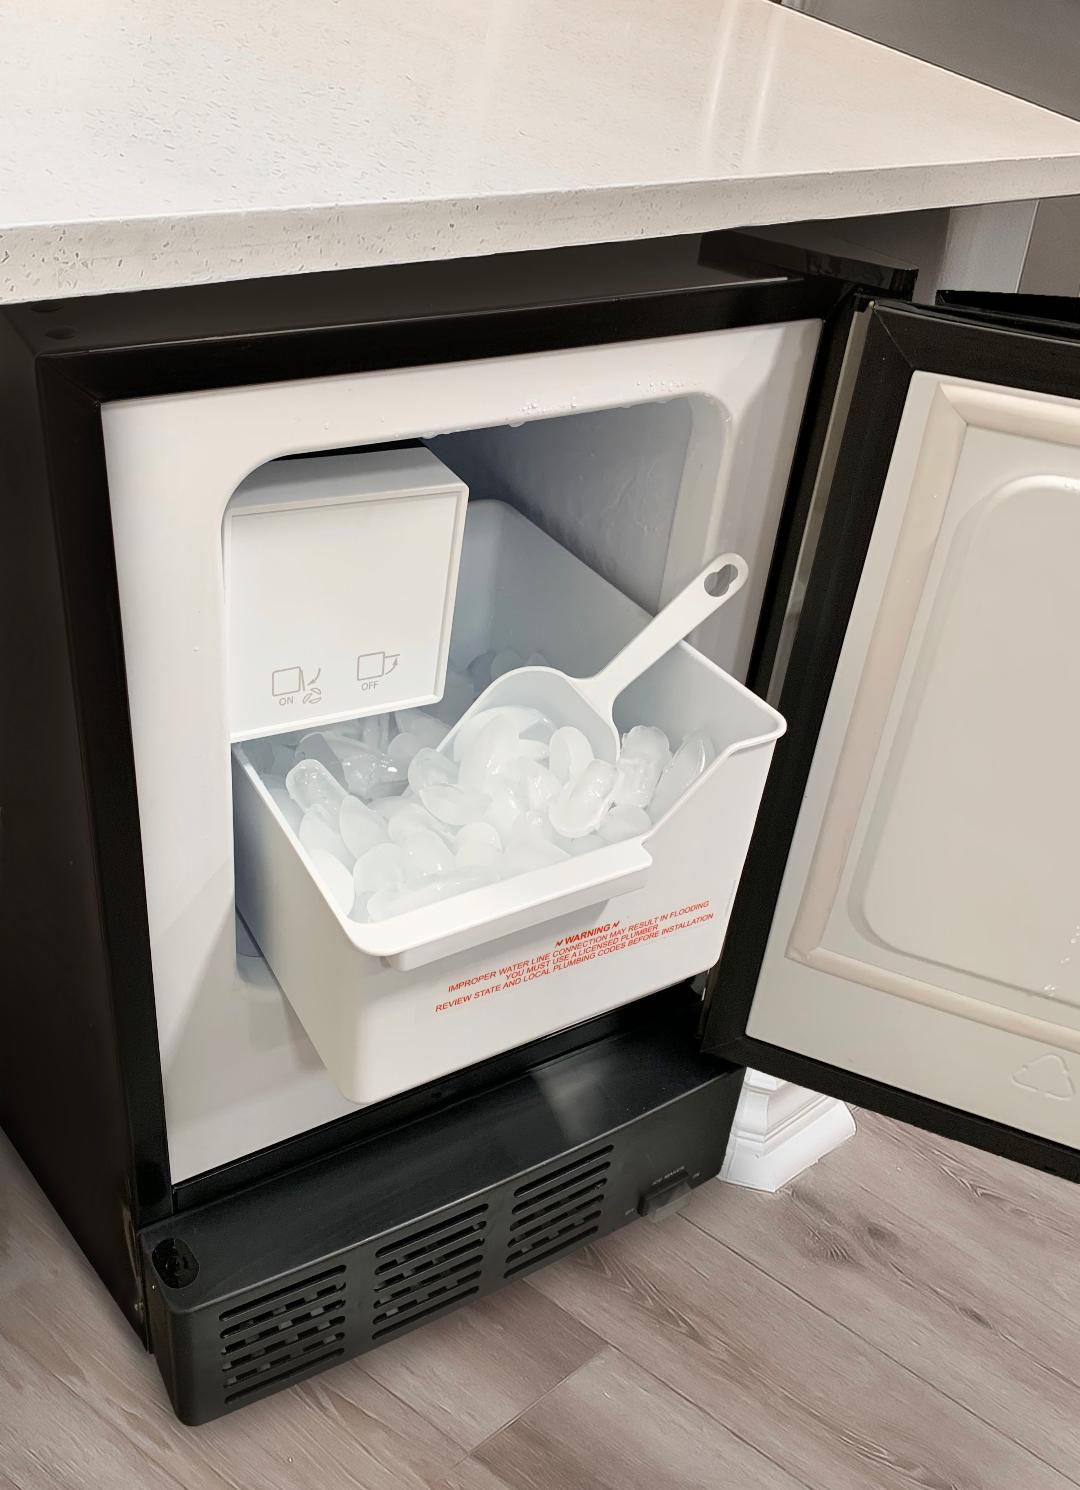 A stainless steel built-in ice maker with crescent-shaped ice cubes, capable of making 12 lbs of ice in 24 hours and storing 6 lbs of ice.